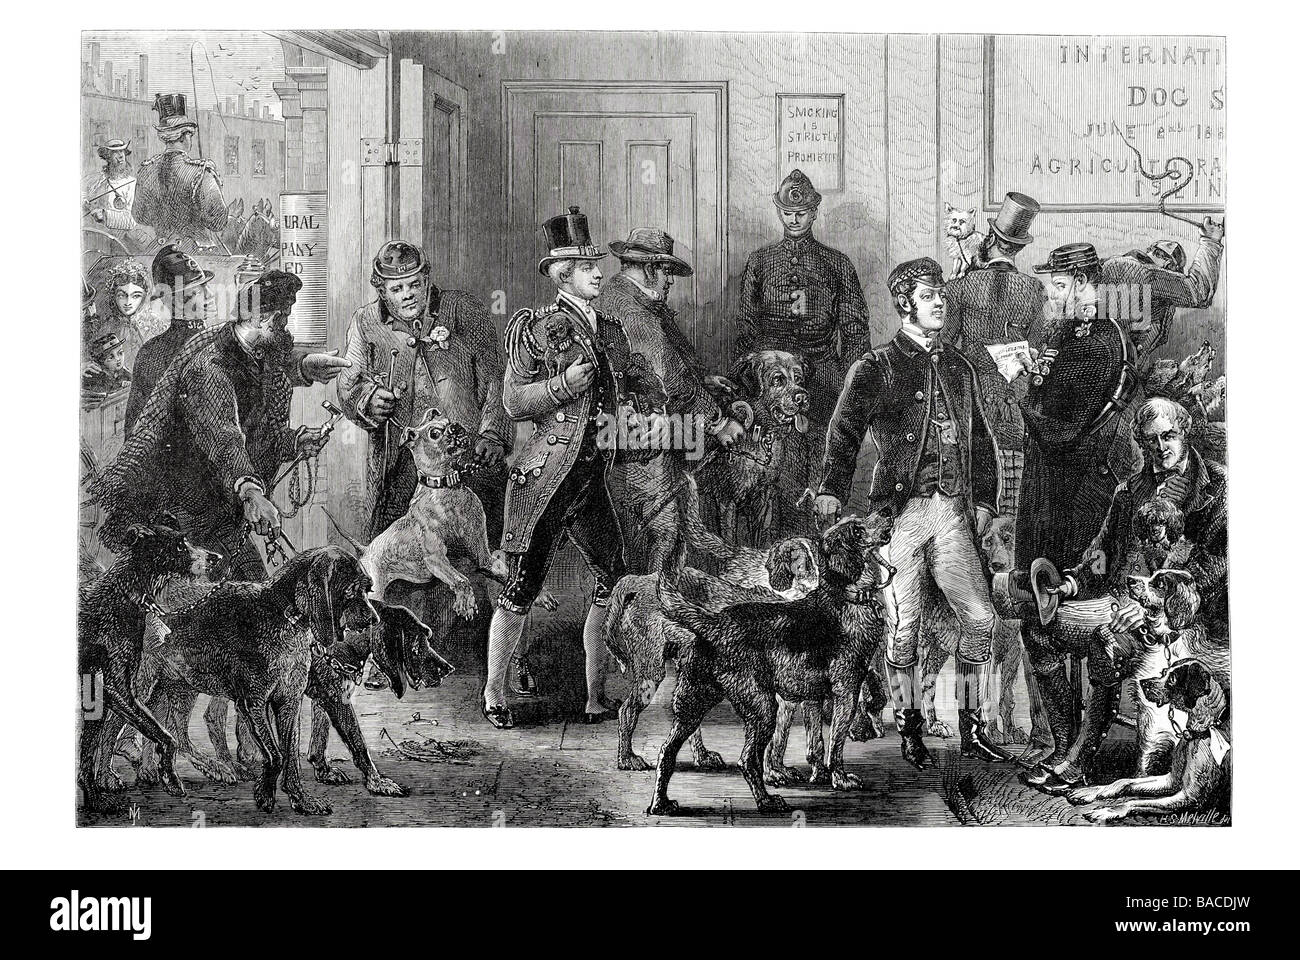 international dog show at islington arrival of dogs 1865 Stock Photo